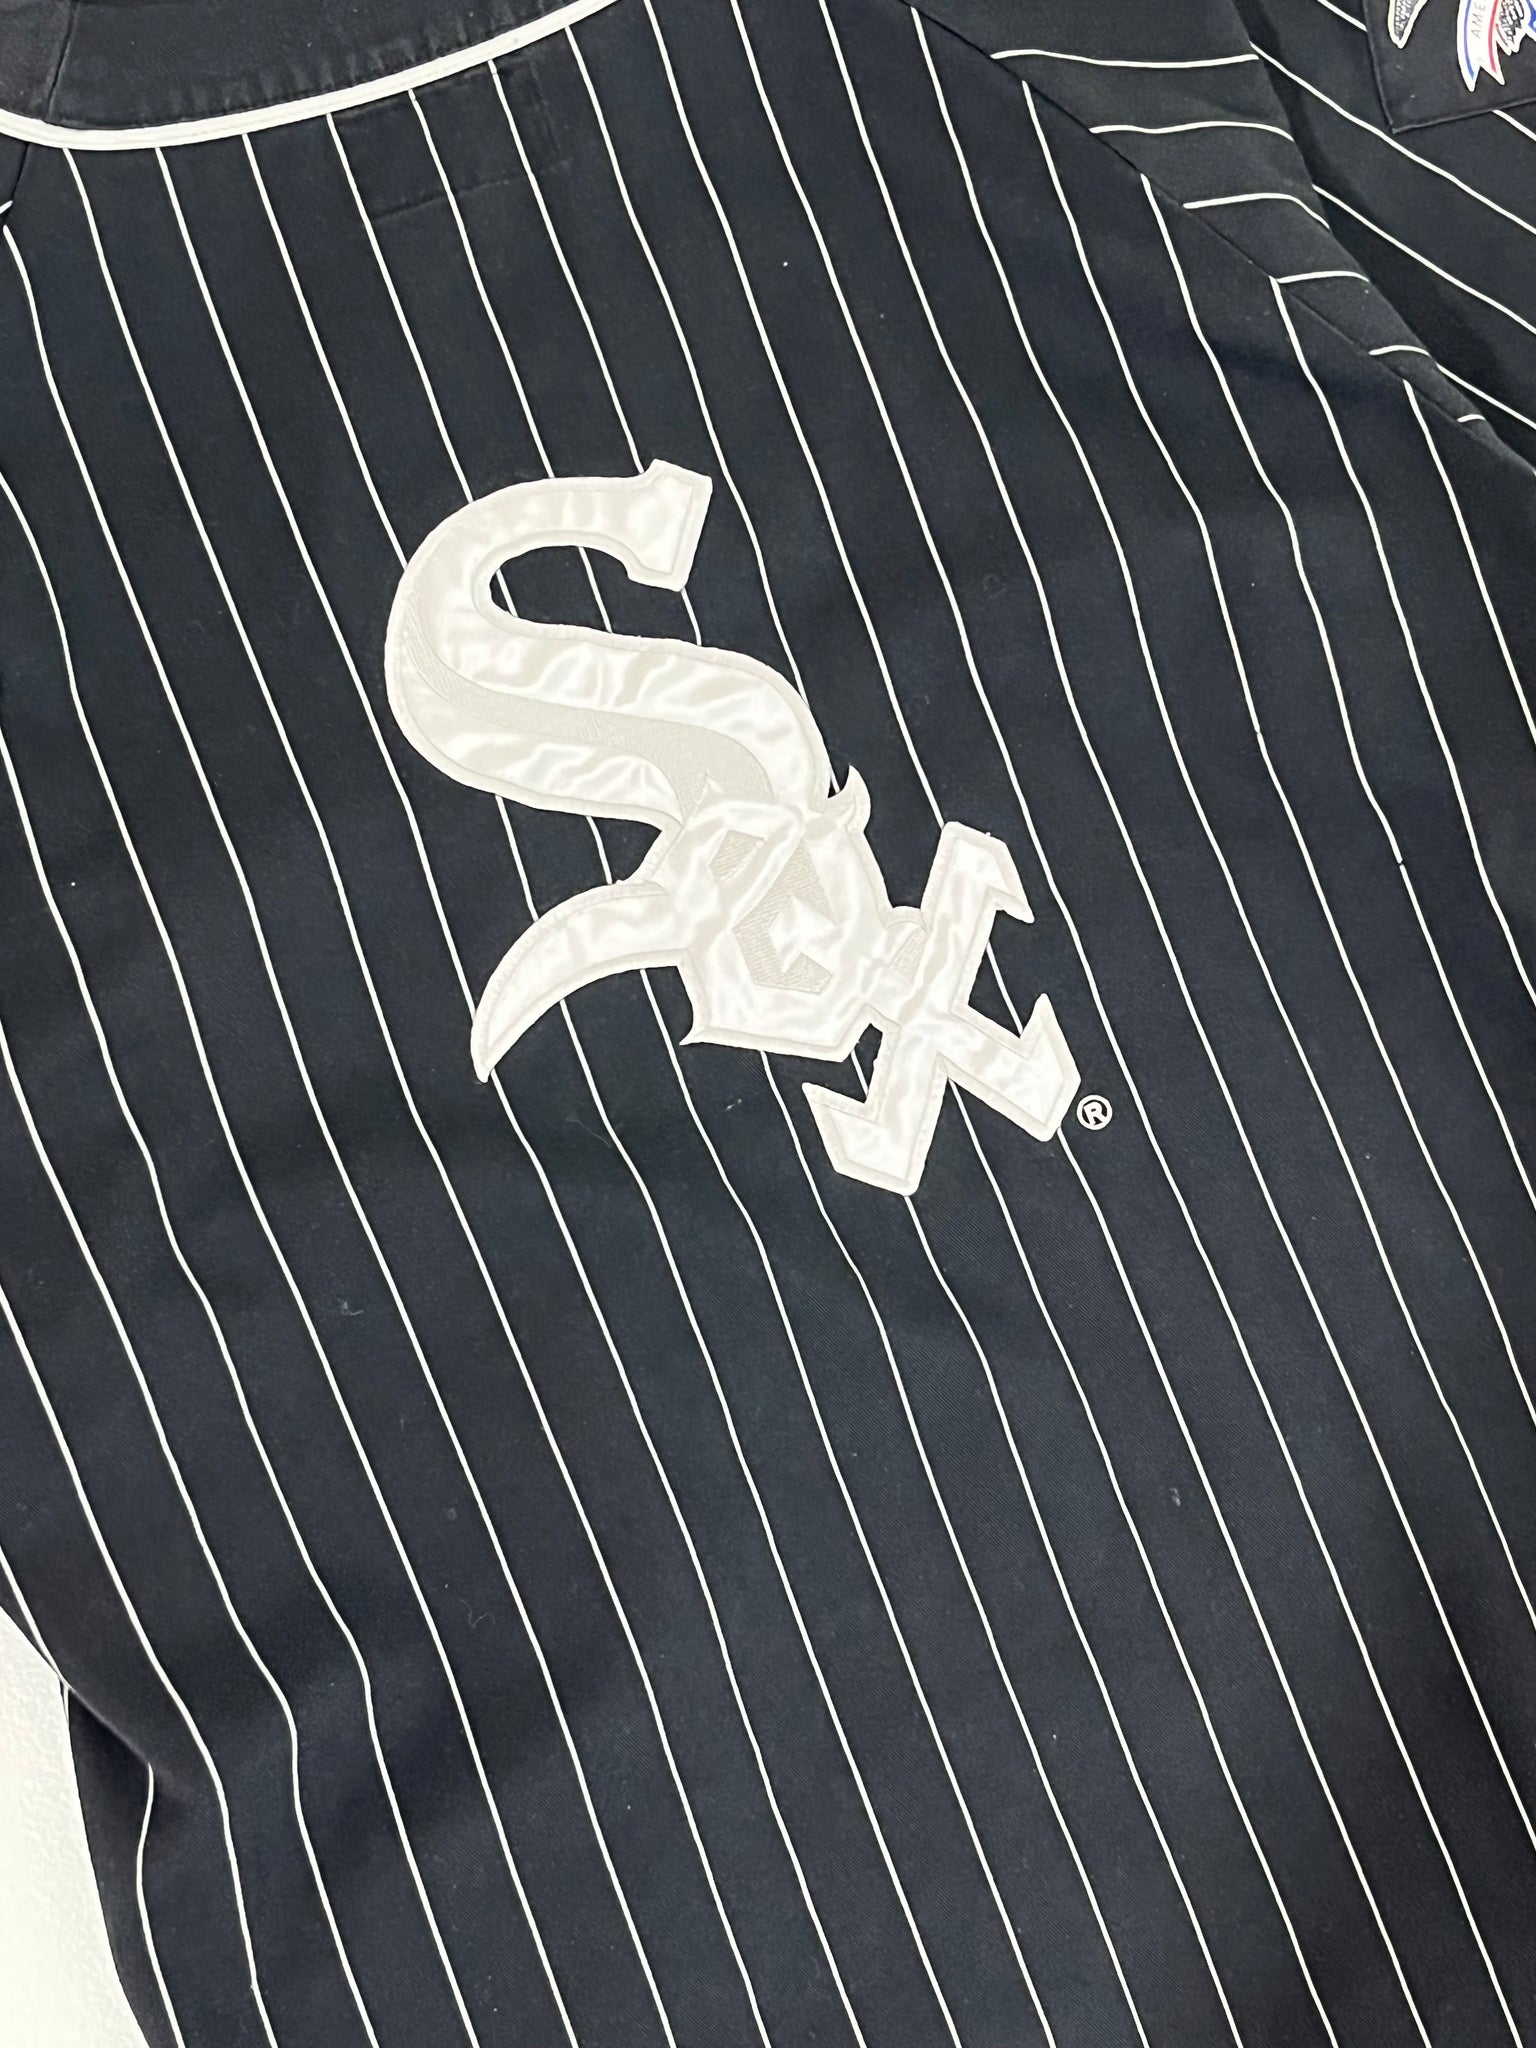 90s Chicago WHITE SOX Jersey / Shirt by Starter / Classic Hip 